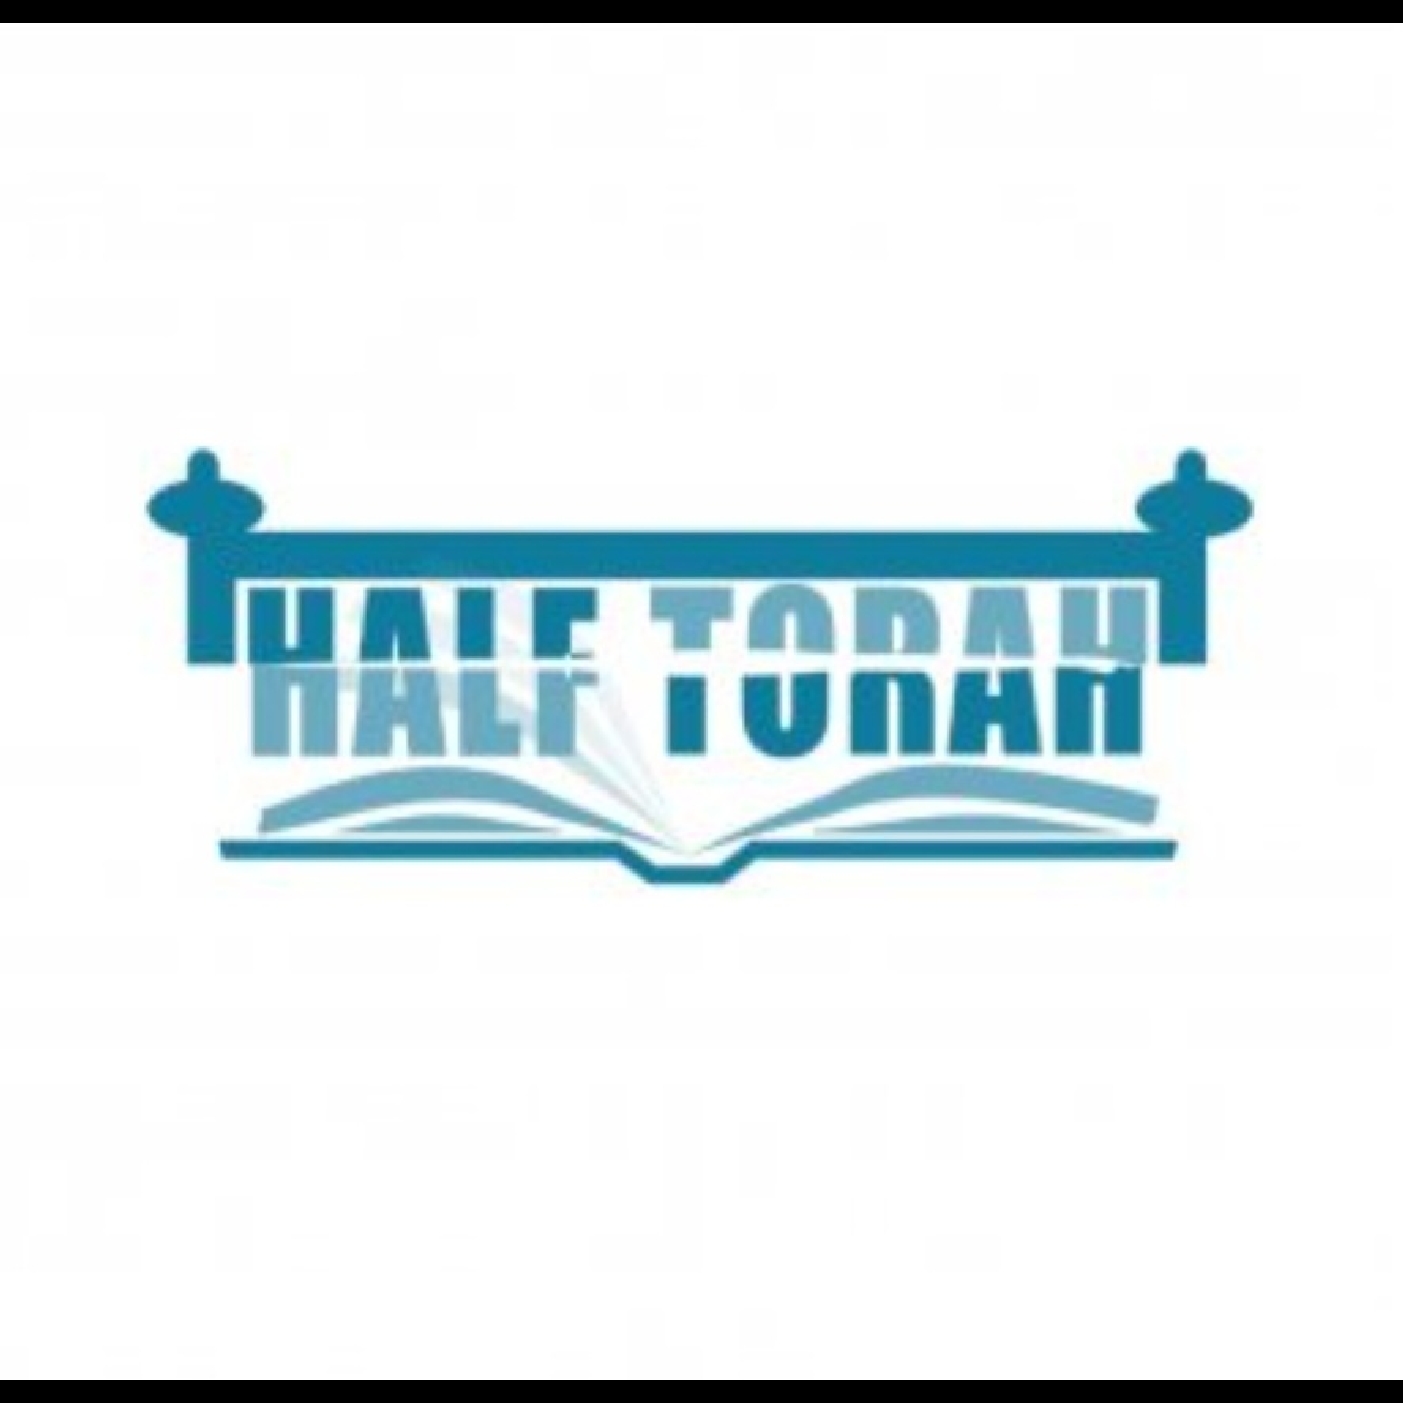 Half-Torah/הַפְטָרָה - Nasso: What Does the NFL have to do with Our Parsha? (Shoftim 13:2-25) 🧔🏻‍♀️